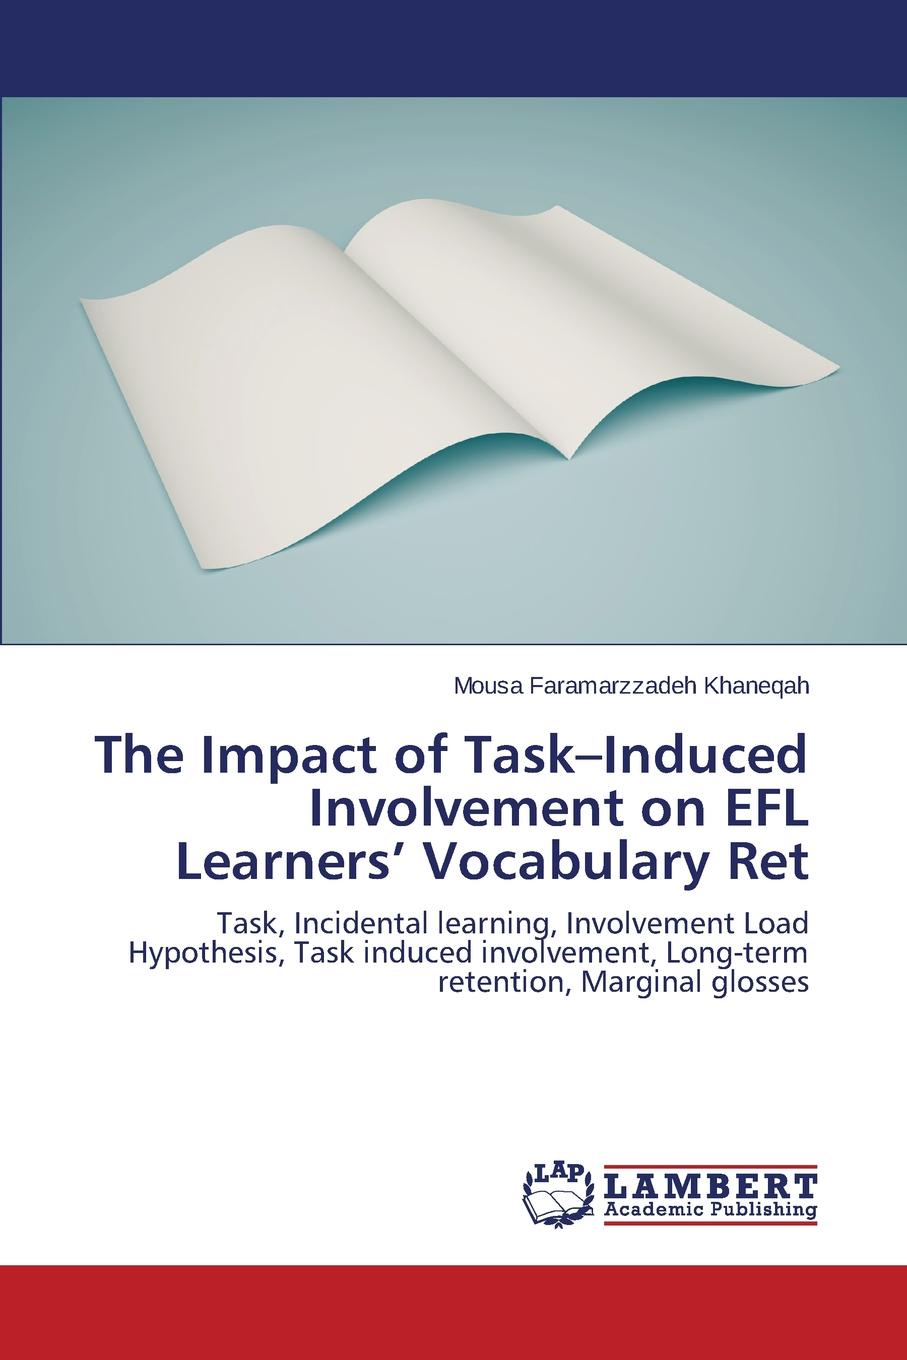 фото The Impact of Task-Induced Involvement on EFL Learners. Vocabulary Ret